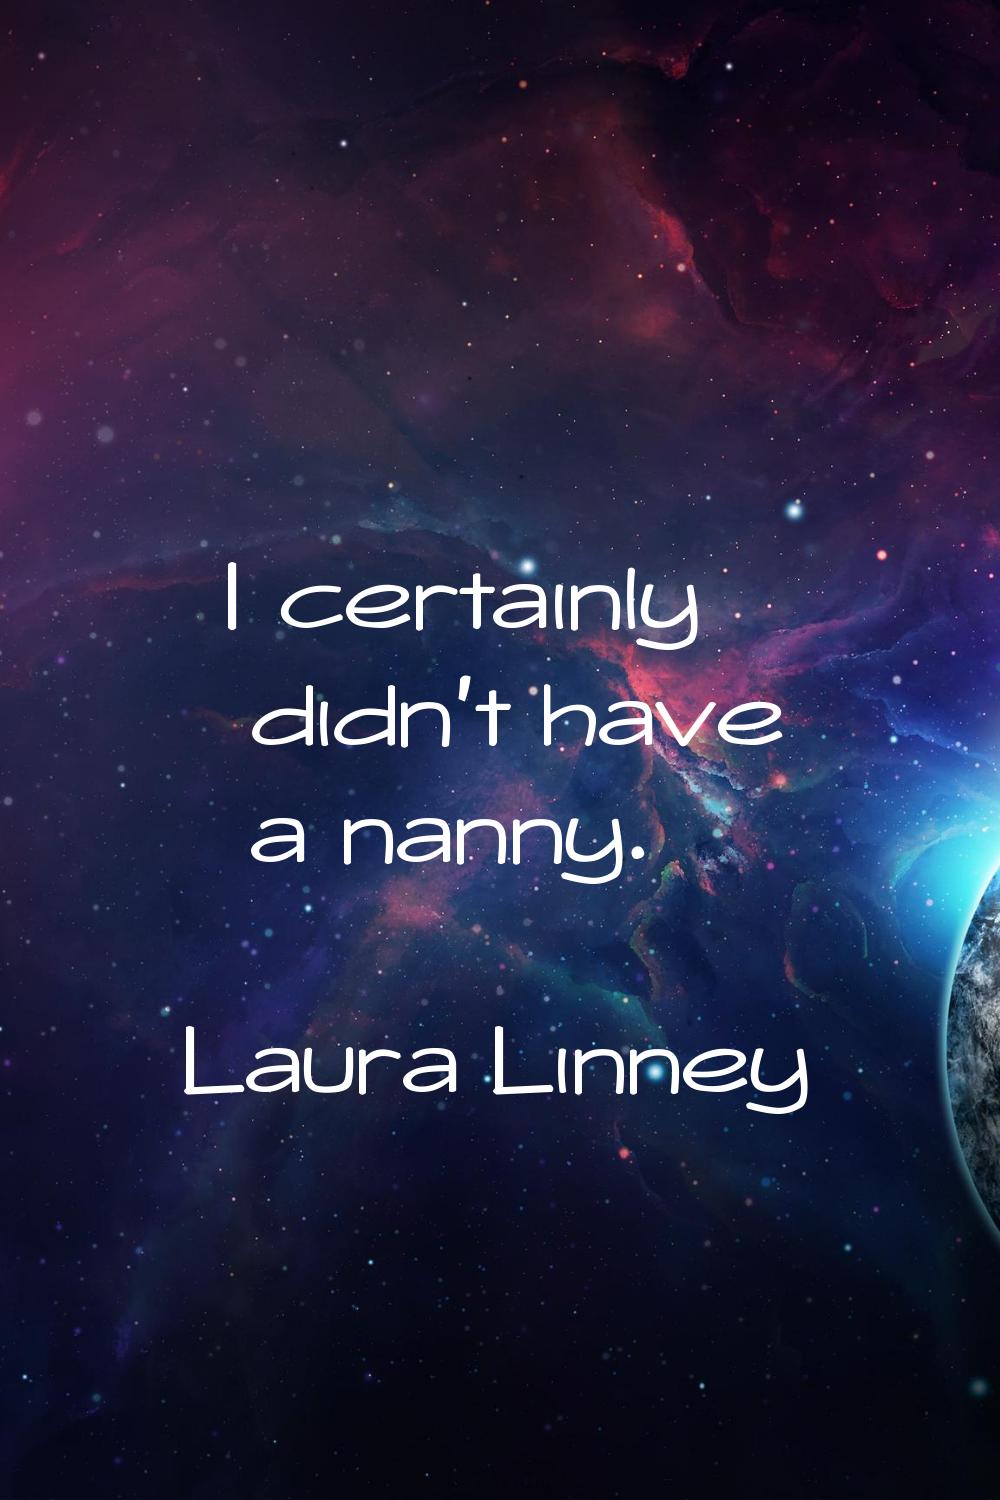 I certainly didn't have a nanny.